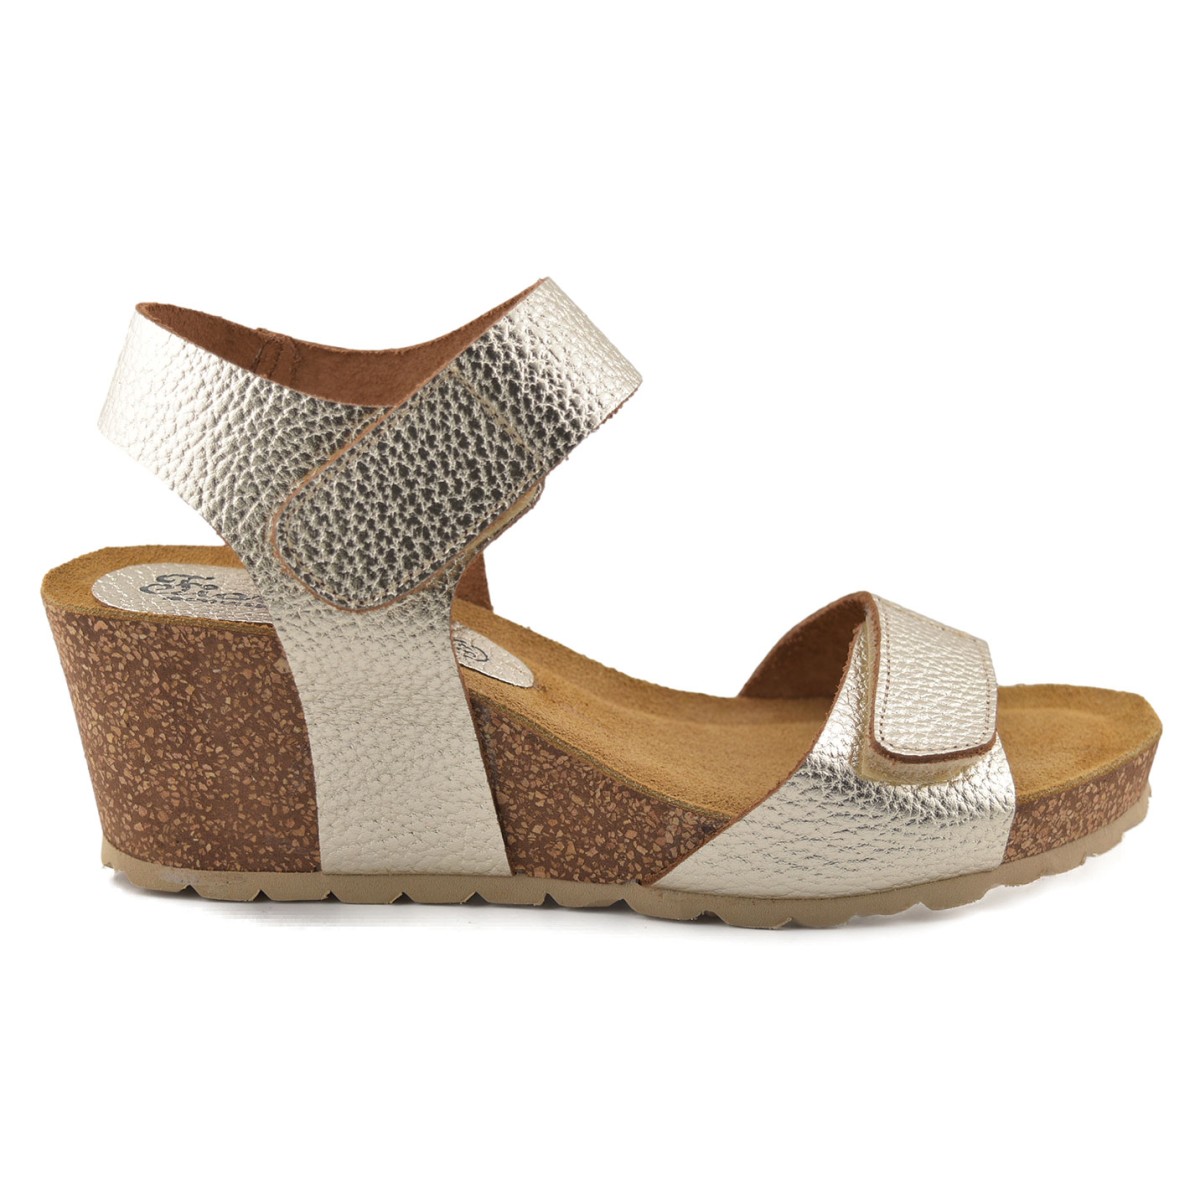 Gold leather bio wedge sandals with wedge by Fiordi